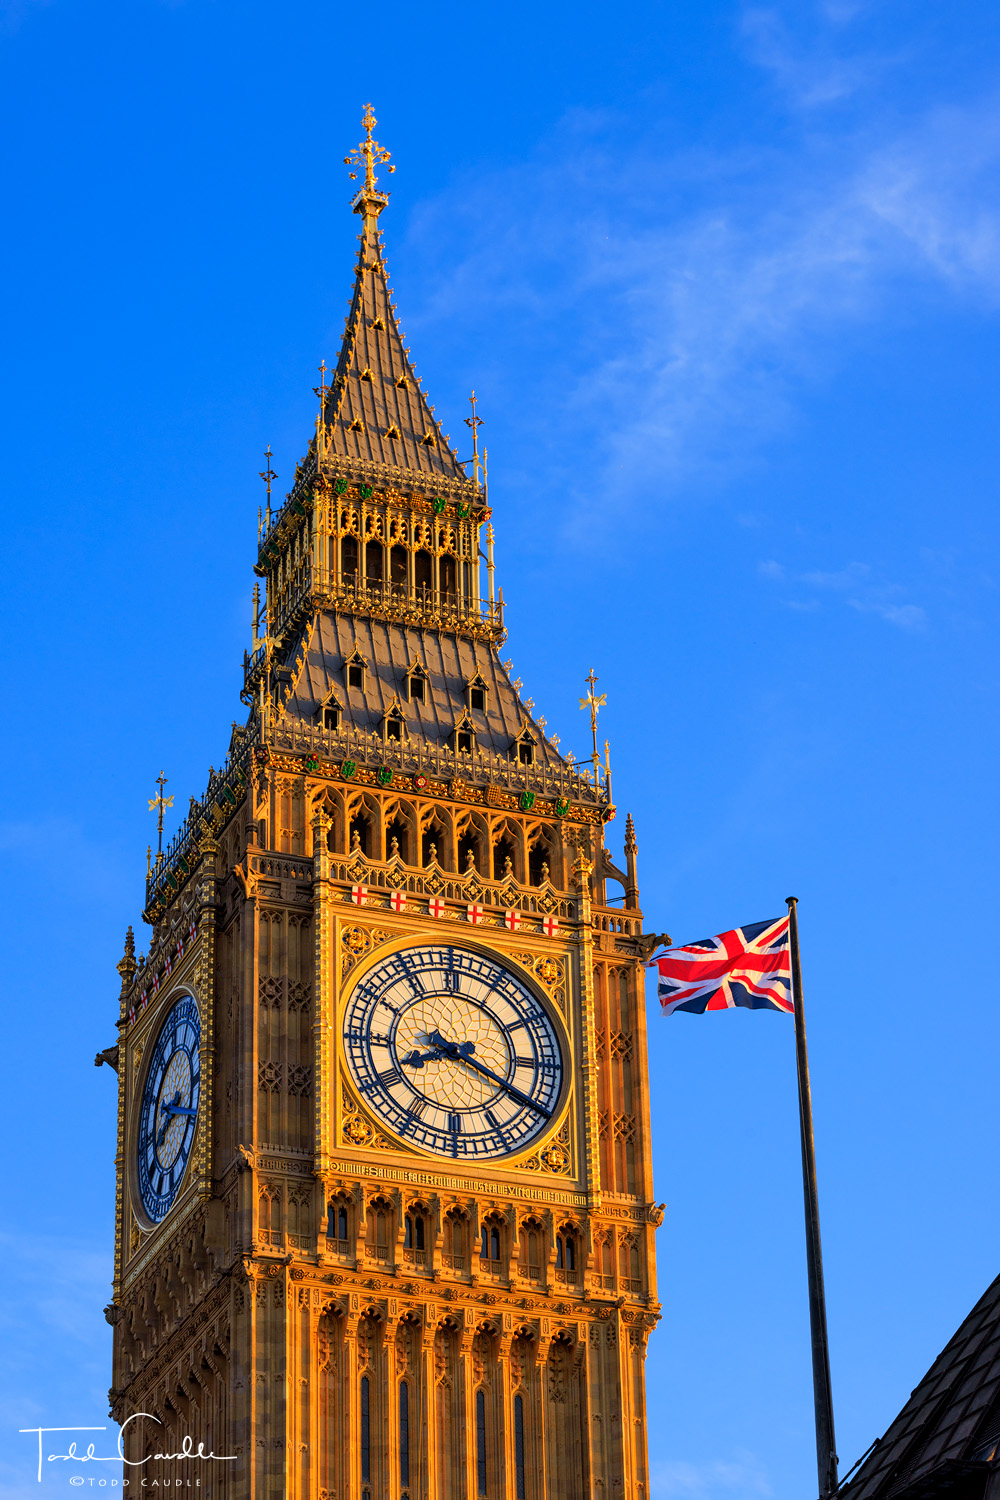 Elizabeth Tower, which houses the famous Big Ben bell, stands tall at the British Houses of Parliament building in London.